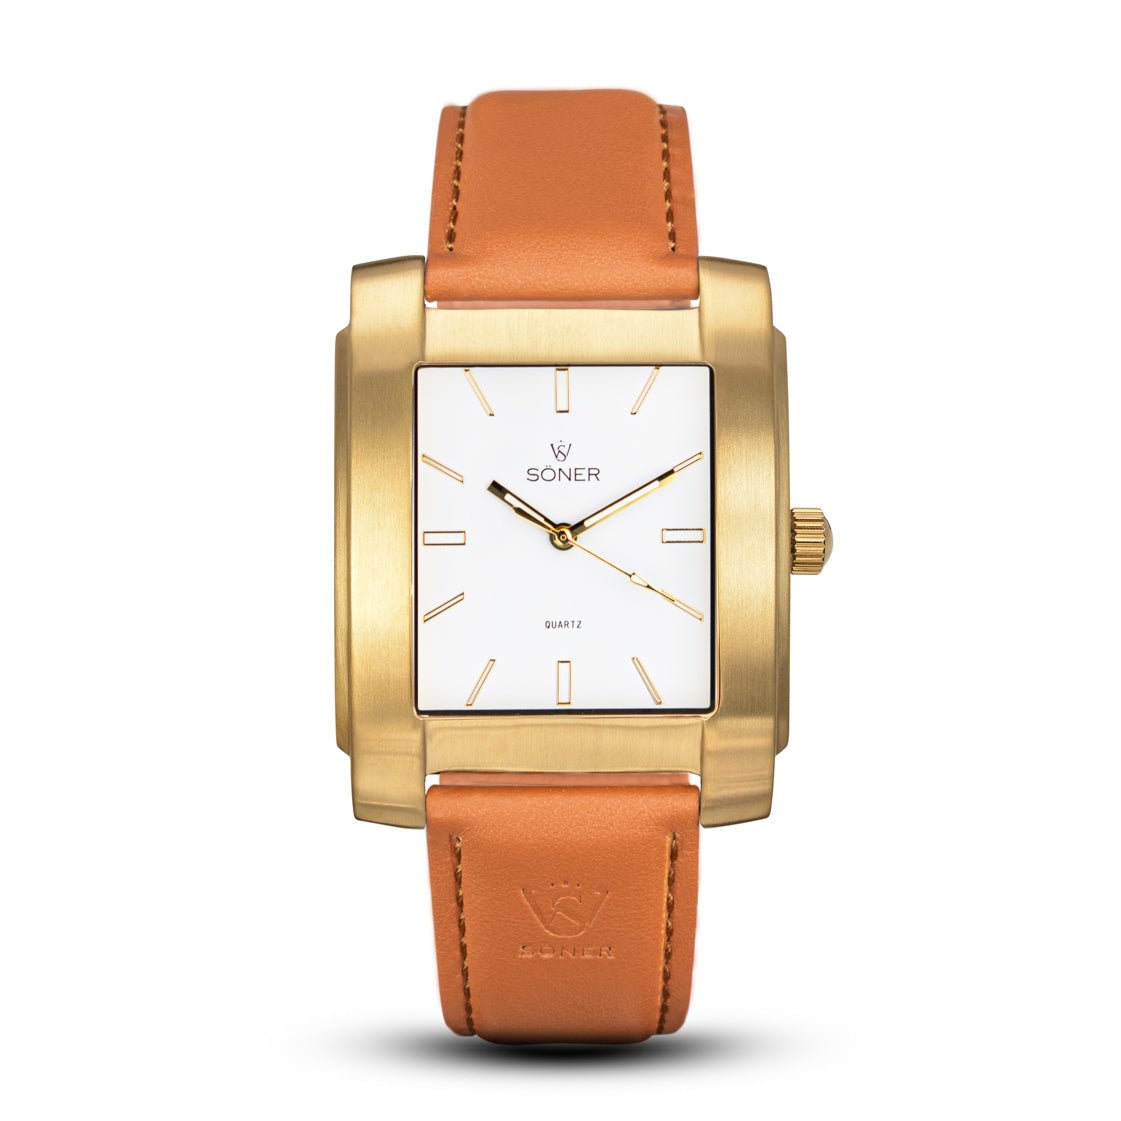 Express, a square watch from söner watches with a brushed gold case and a white dial Light brown strap.